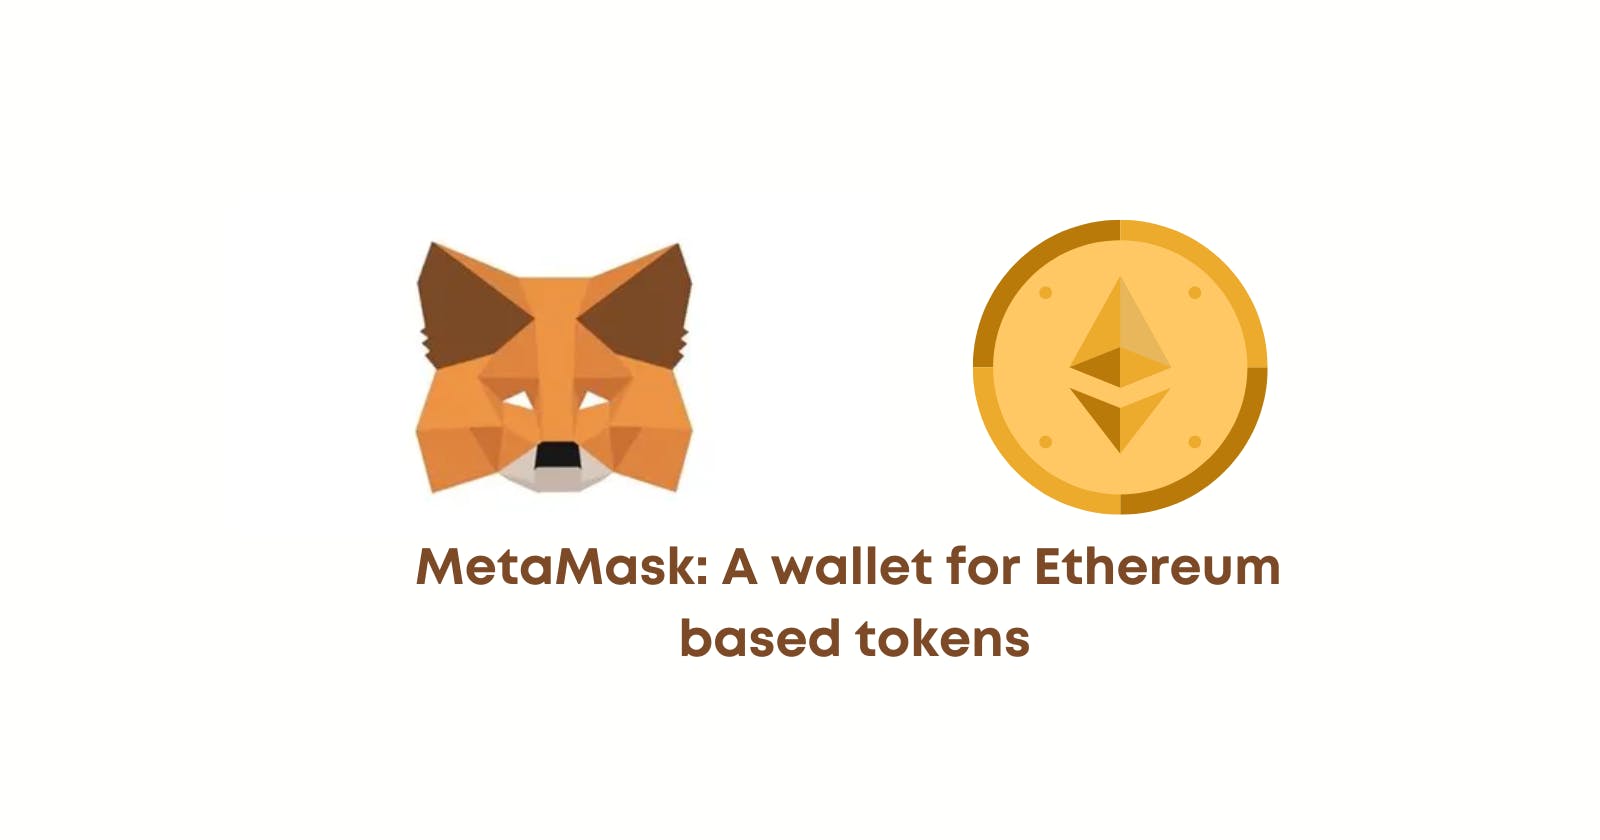 How to set up a MetaMask account?